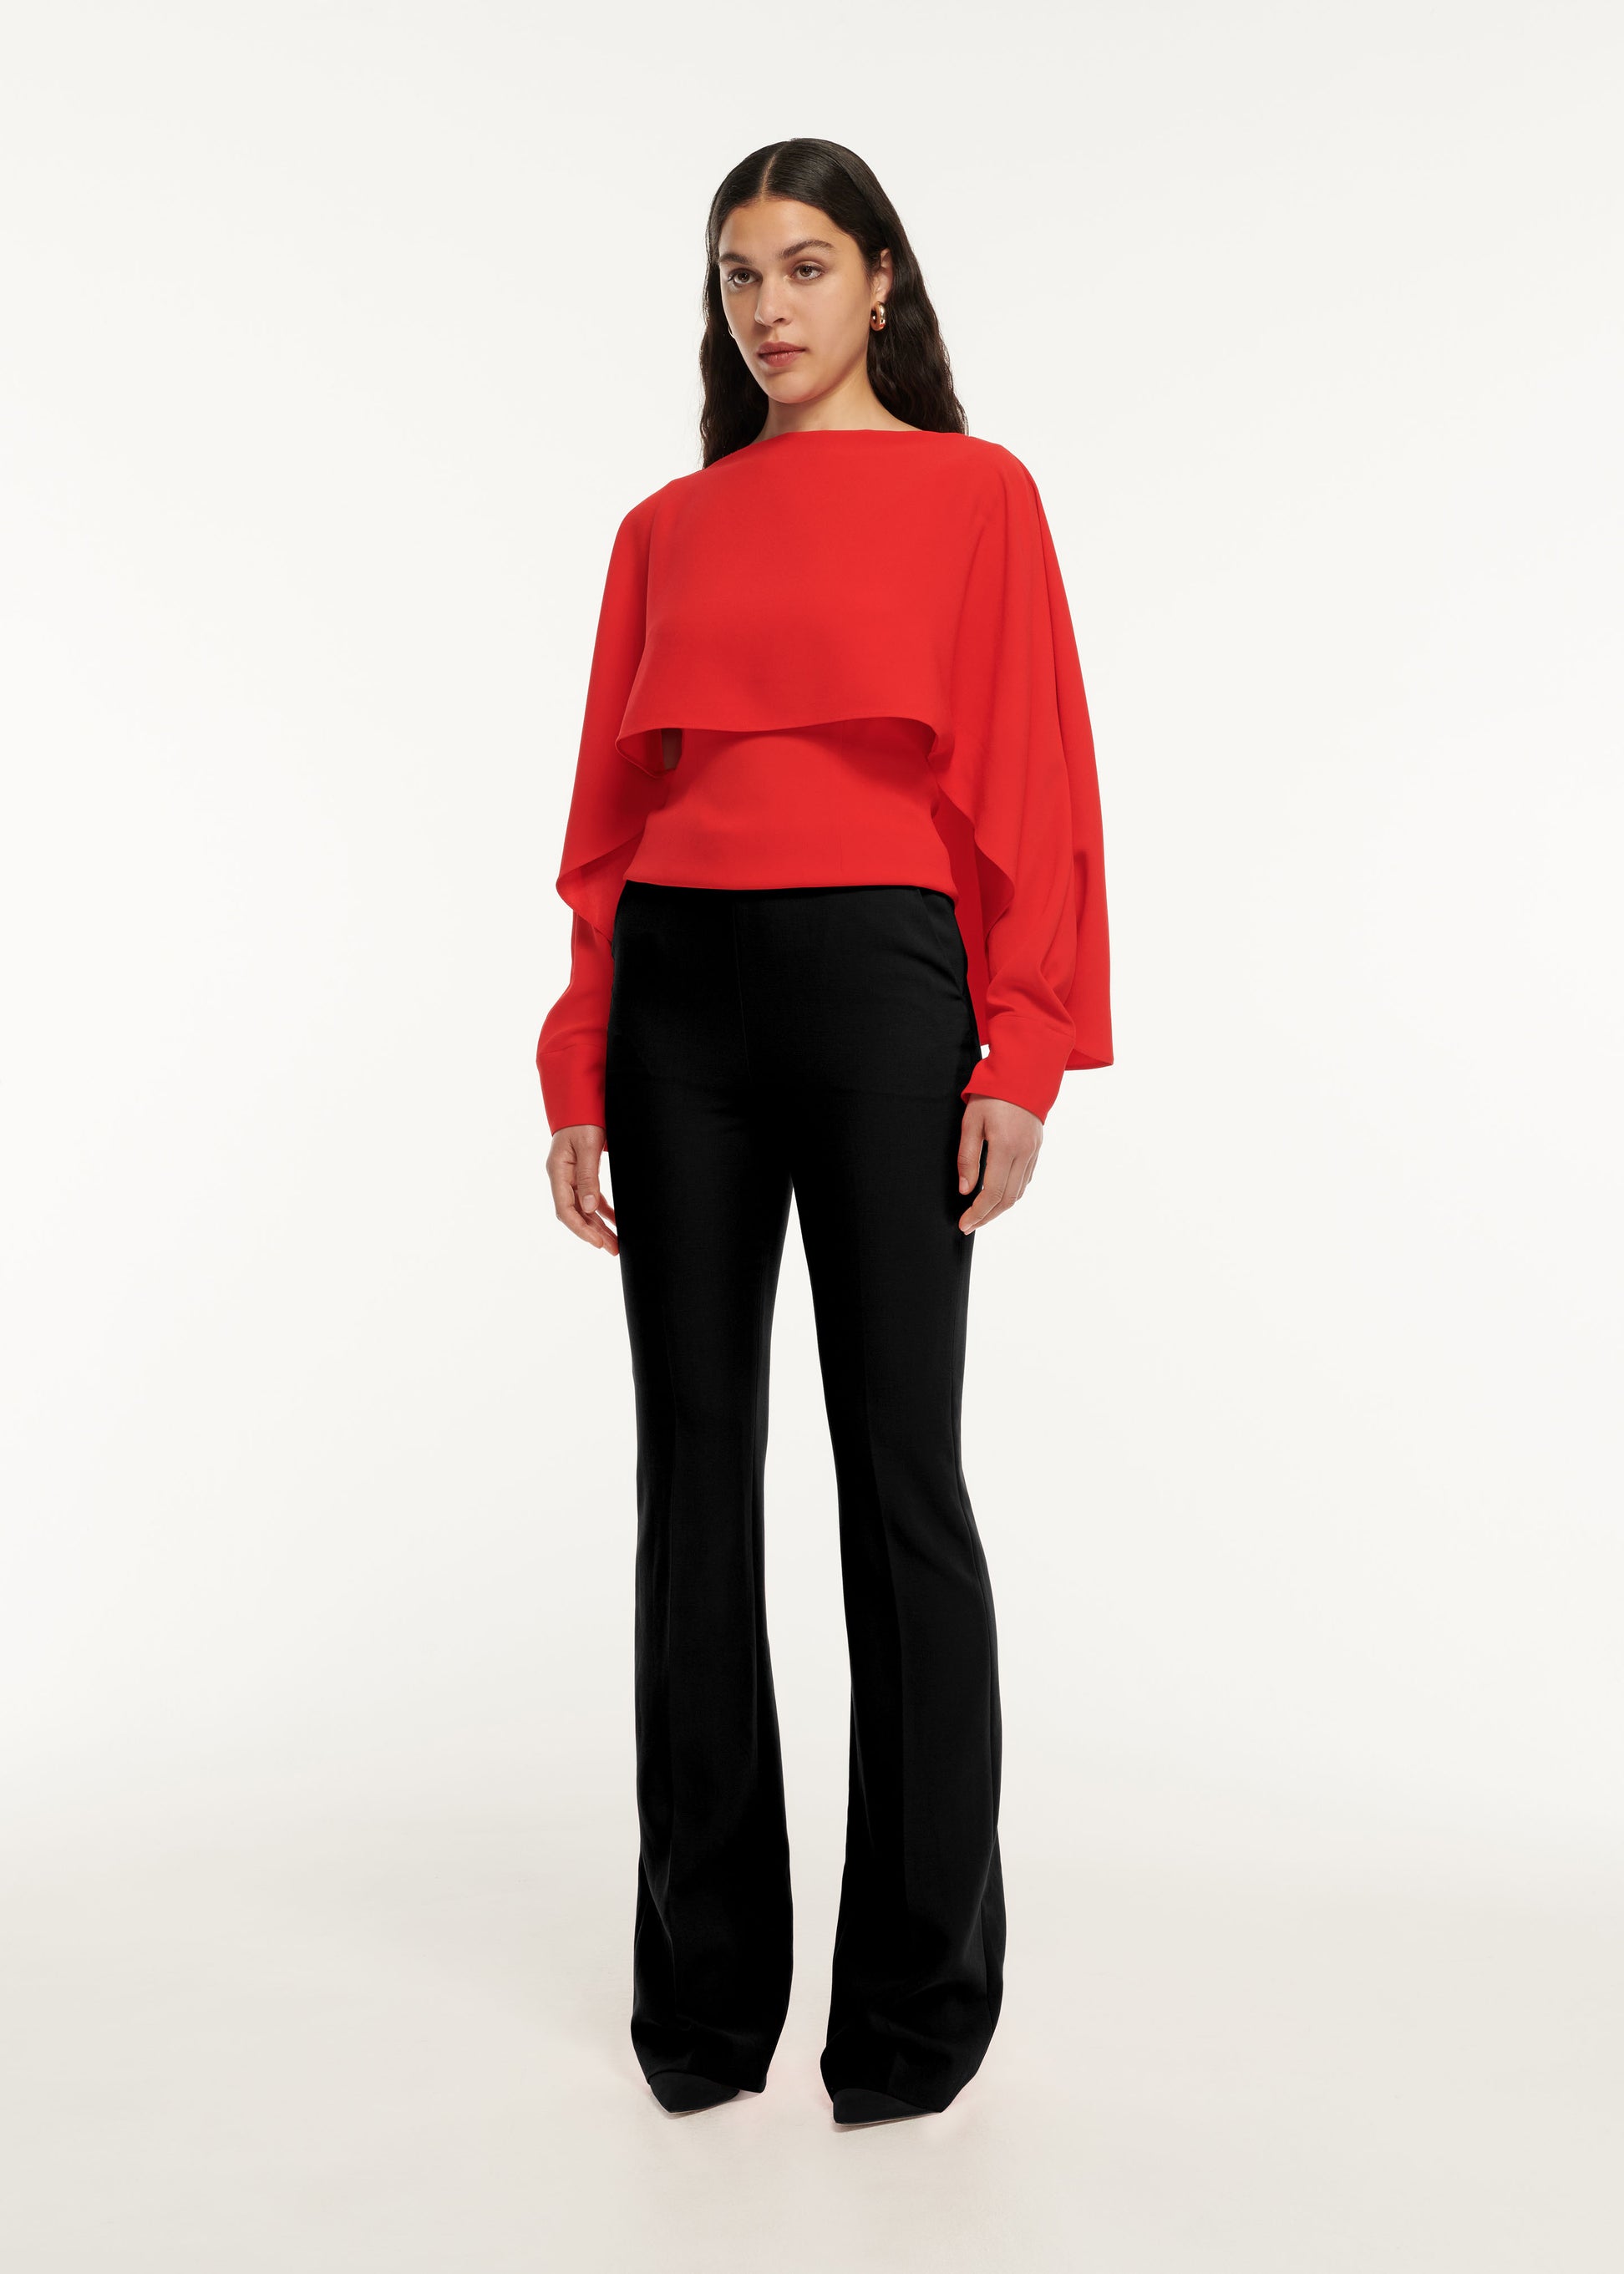 A woman wearing the Long Sleeve Satin Crepe Top in Red